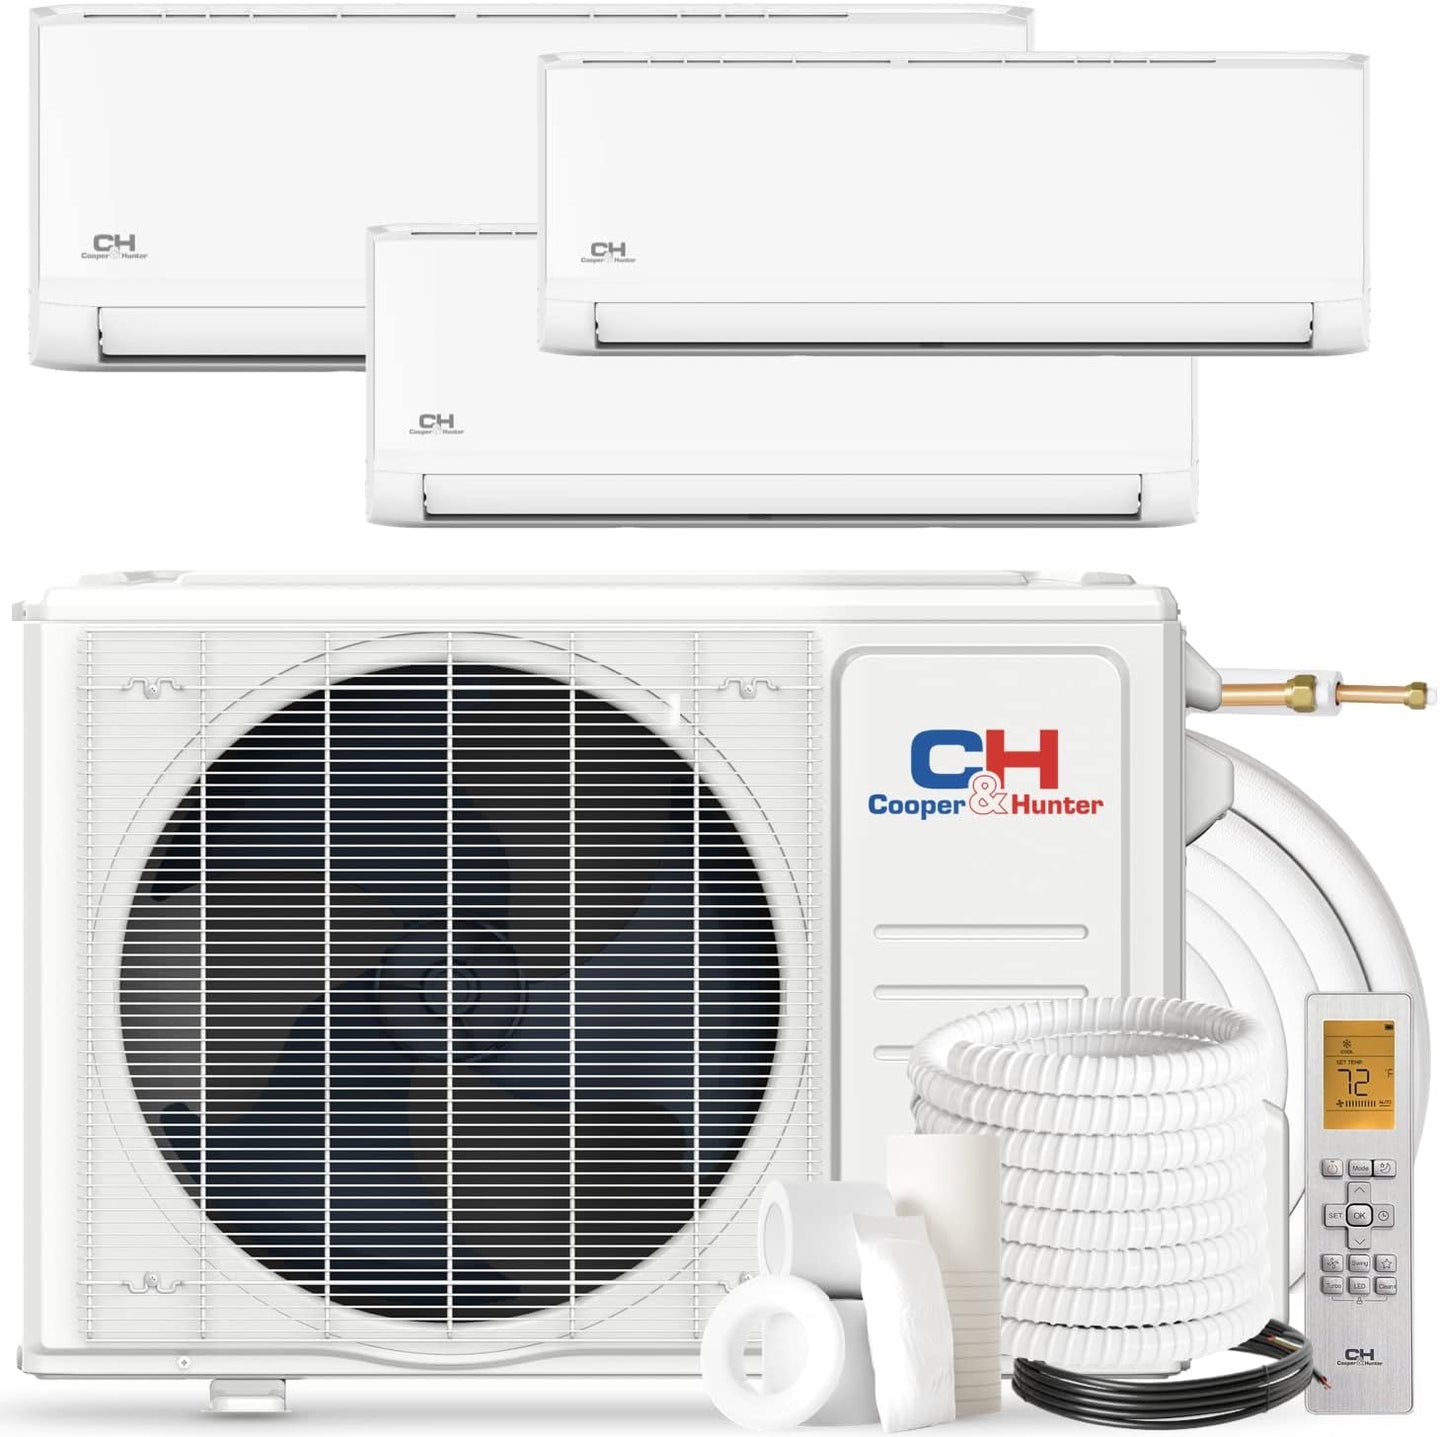 Cooper & Hunter OLIVIA Series Tri 3 Zone 6000 6000 18000 BTU 23.8 SEER Multi Zone Ductless Mini Split Air Conditioner and Heater Full Set with 25ft Installation Kits